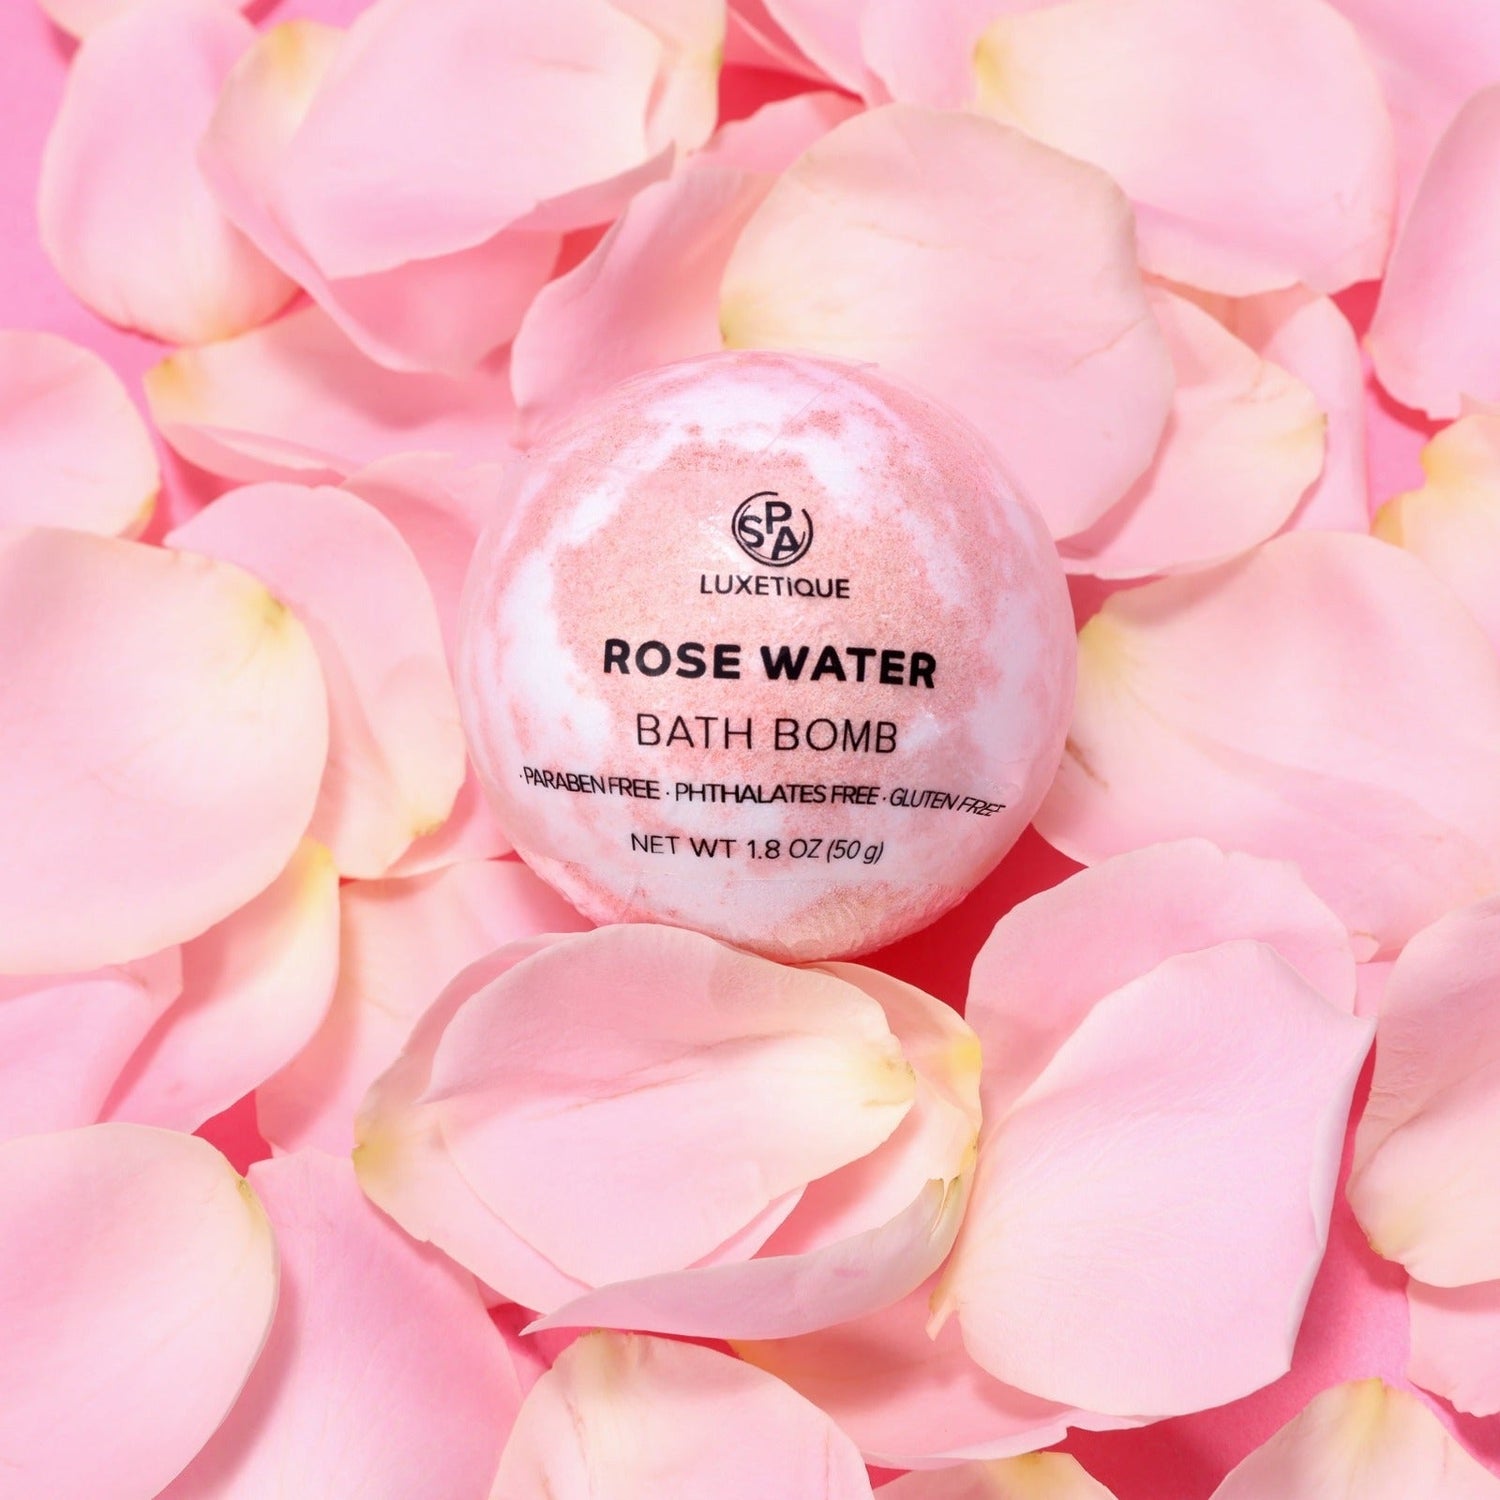 Rose Water Gift Set, Valentine's Day Gifts, Gifts For Her, Mom Gifts – Body  & Earth Inc